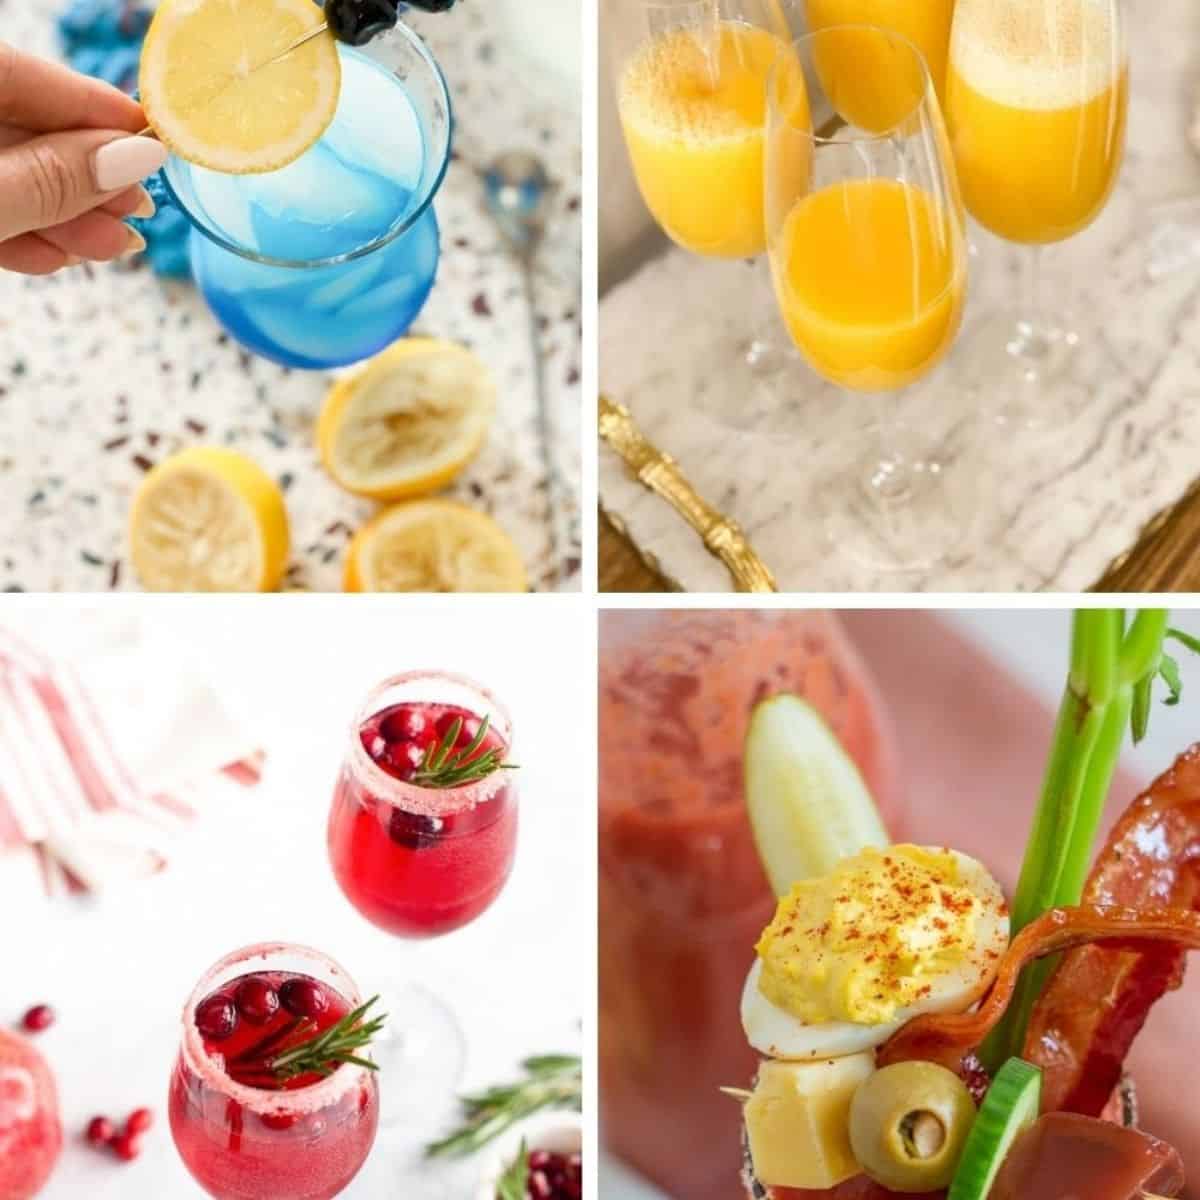 Popular Virgin Drinks in a collage